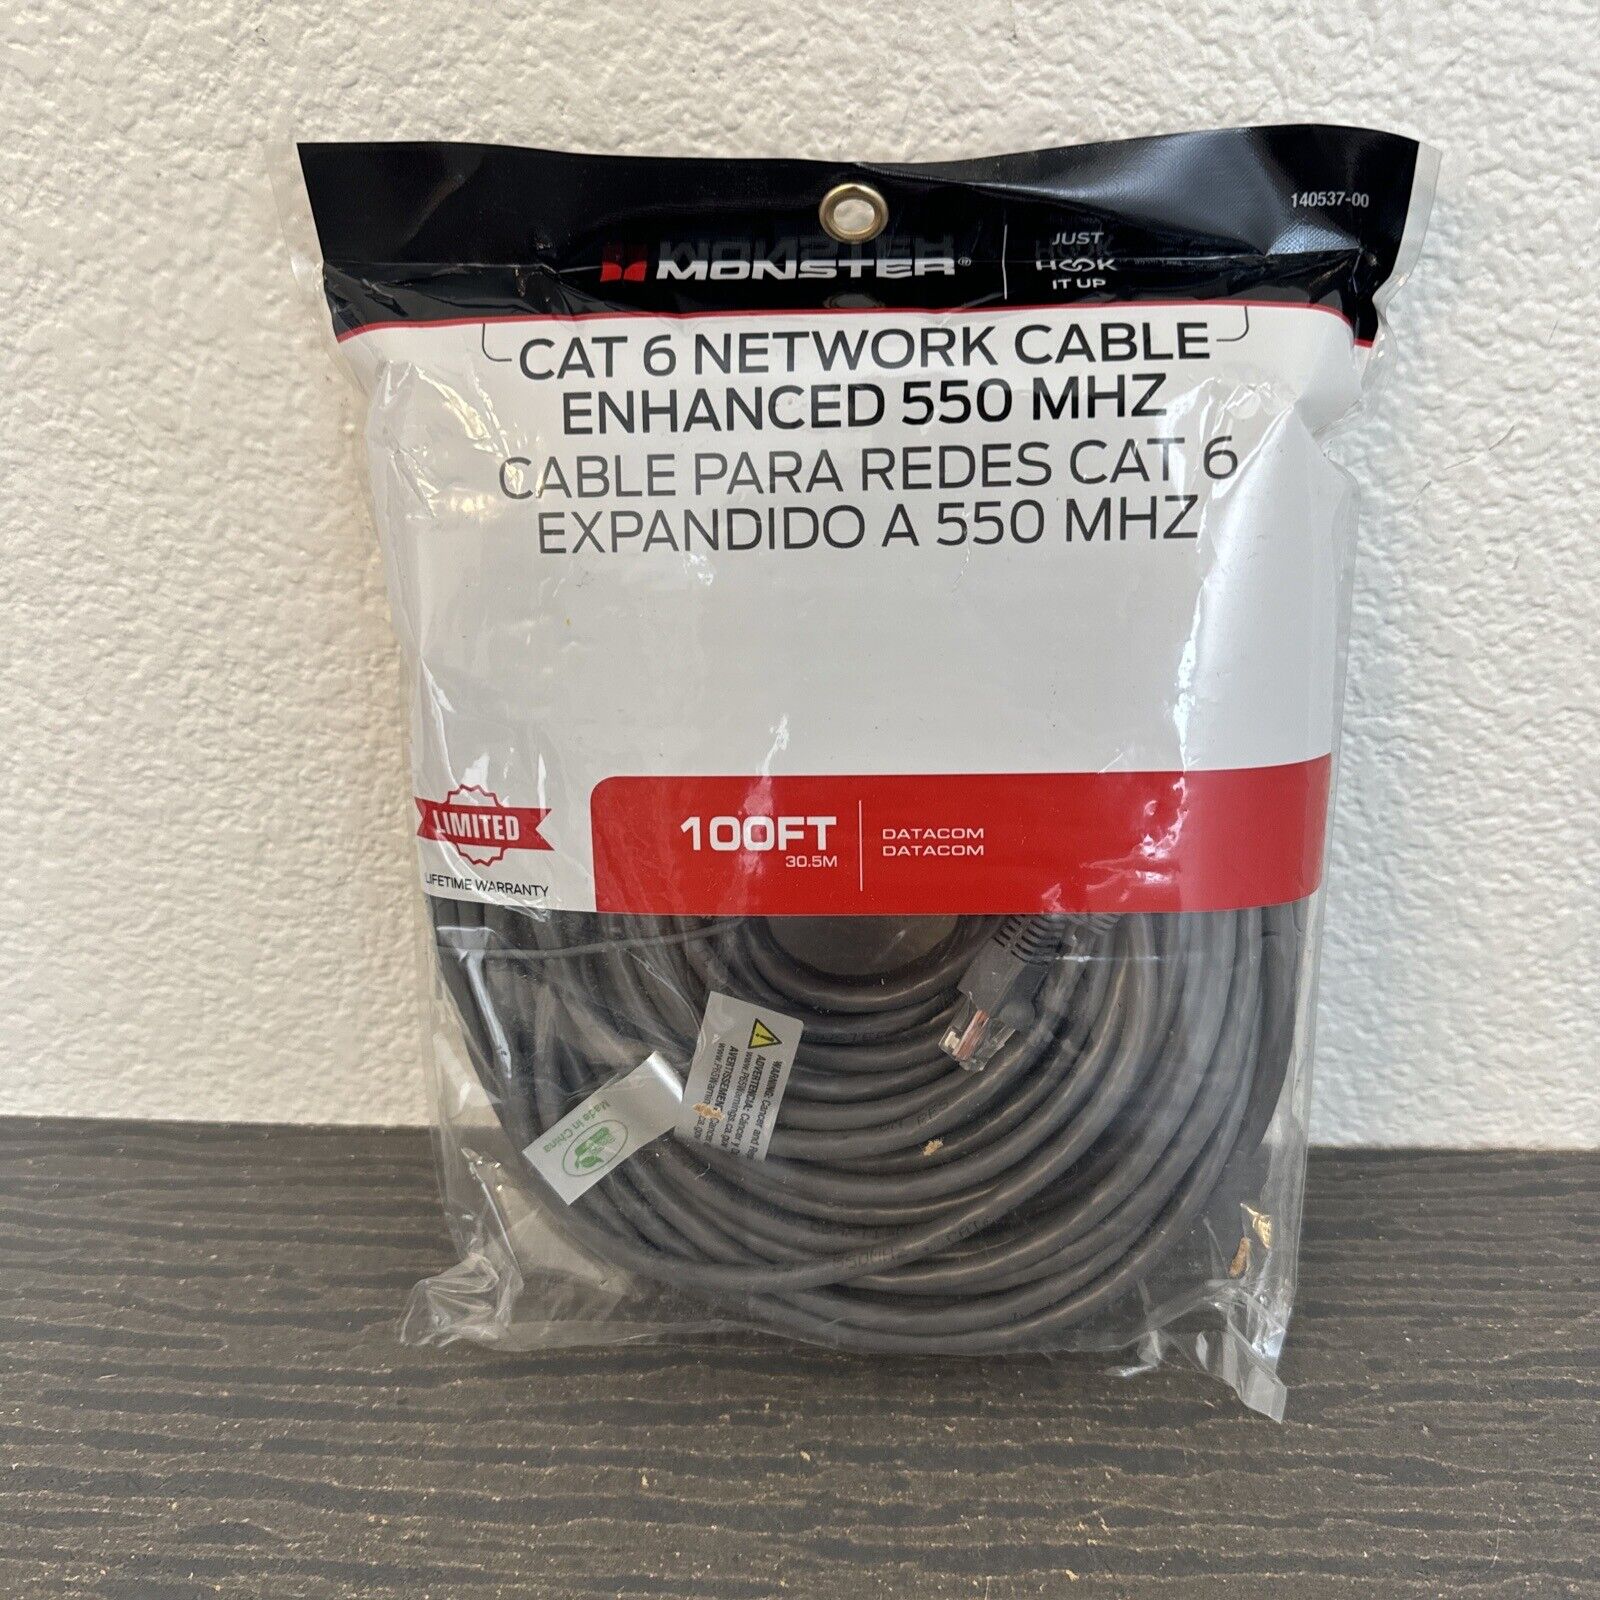 Monster Cat 6 Networking Cable 100 Ft. 140537-00